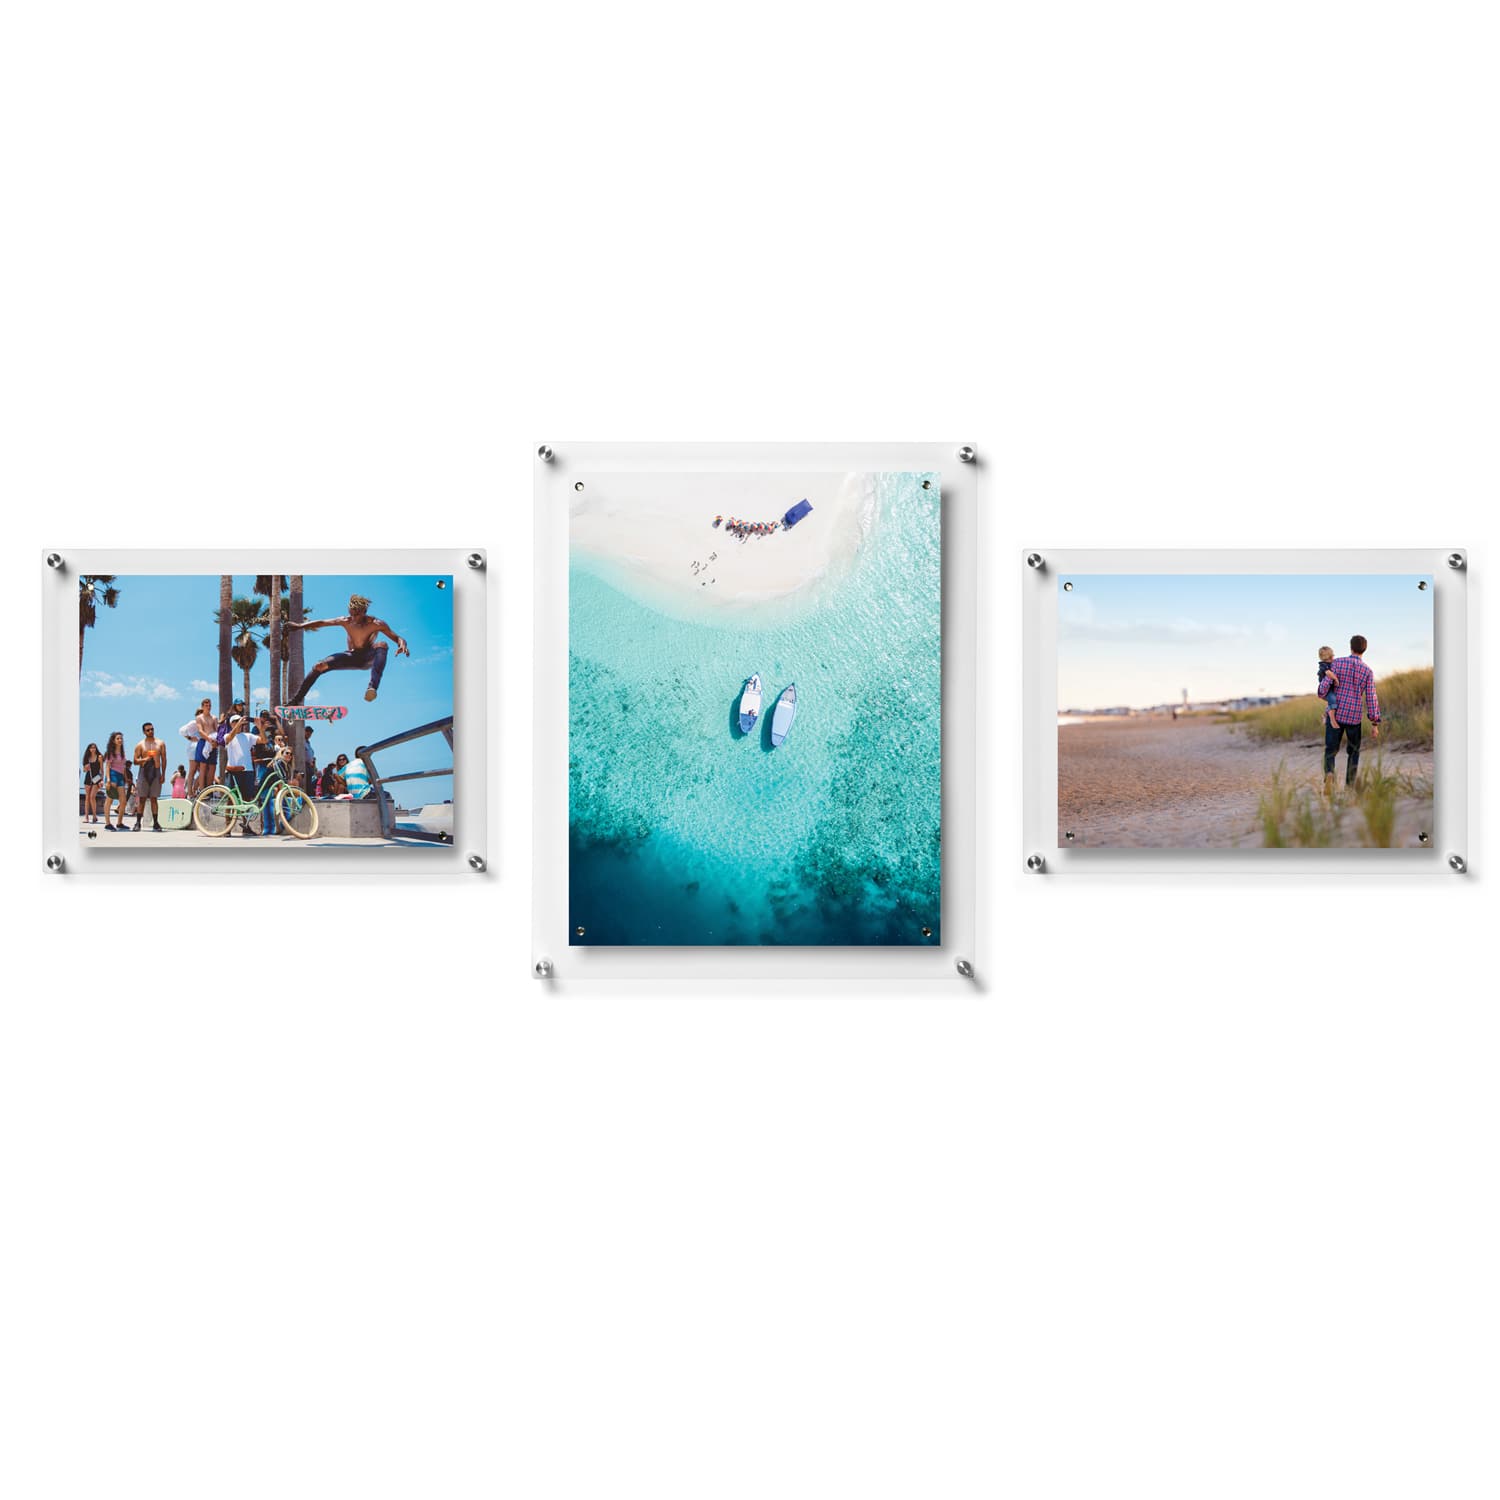 Wexel Art Gallery Wall Single Panel Acrylic Floating Frames & Magnets Set of 3